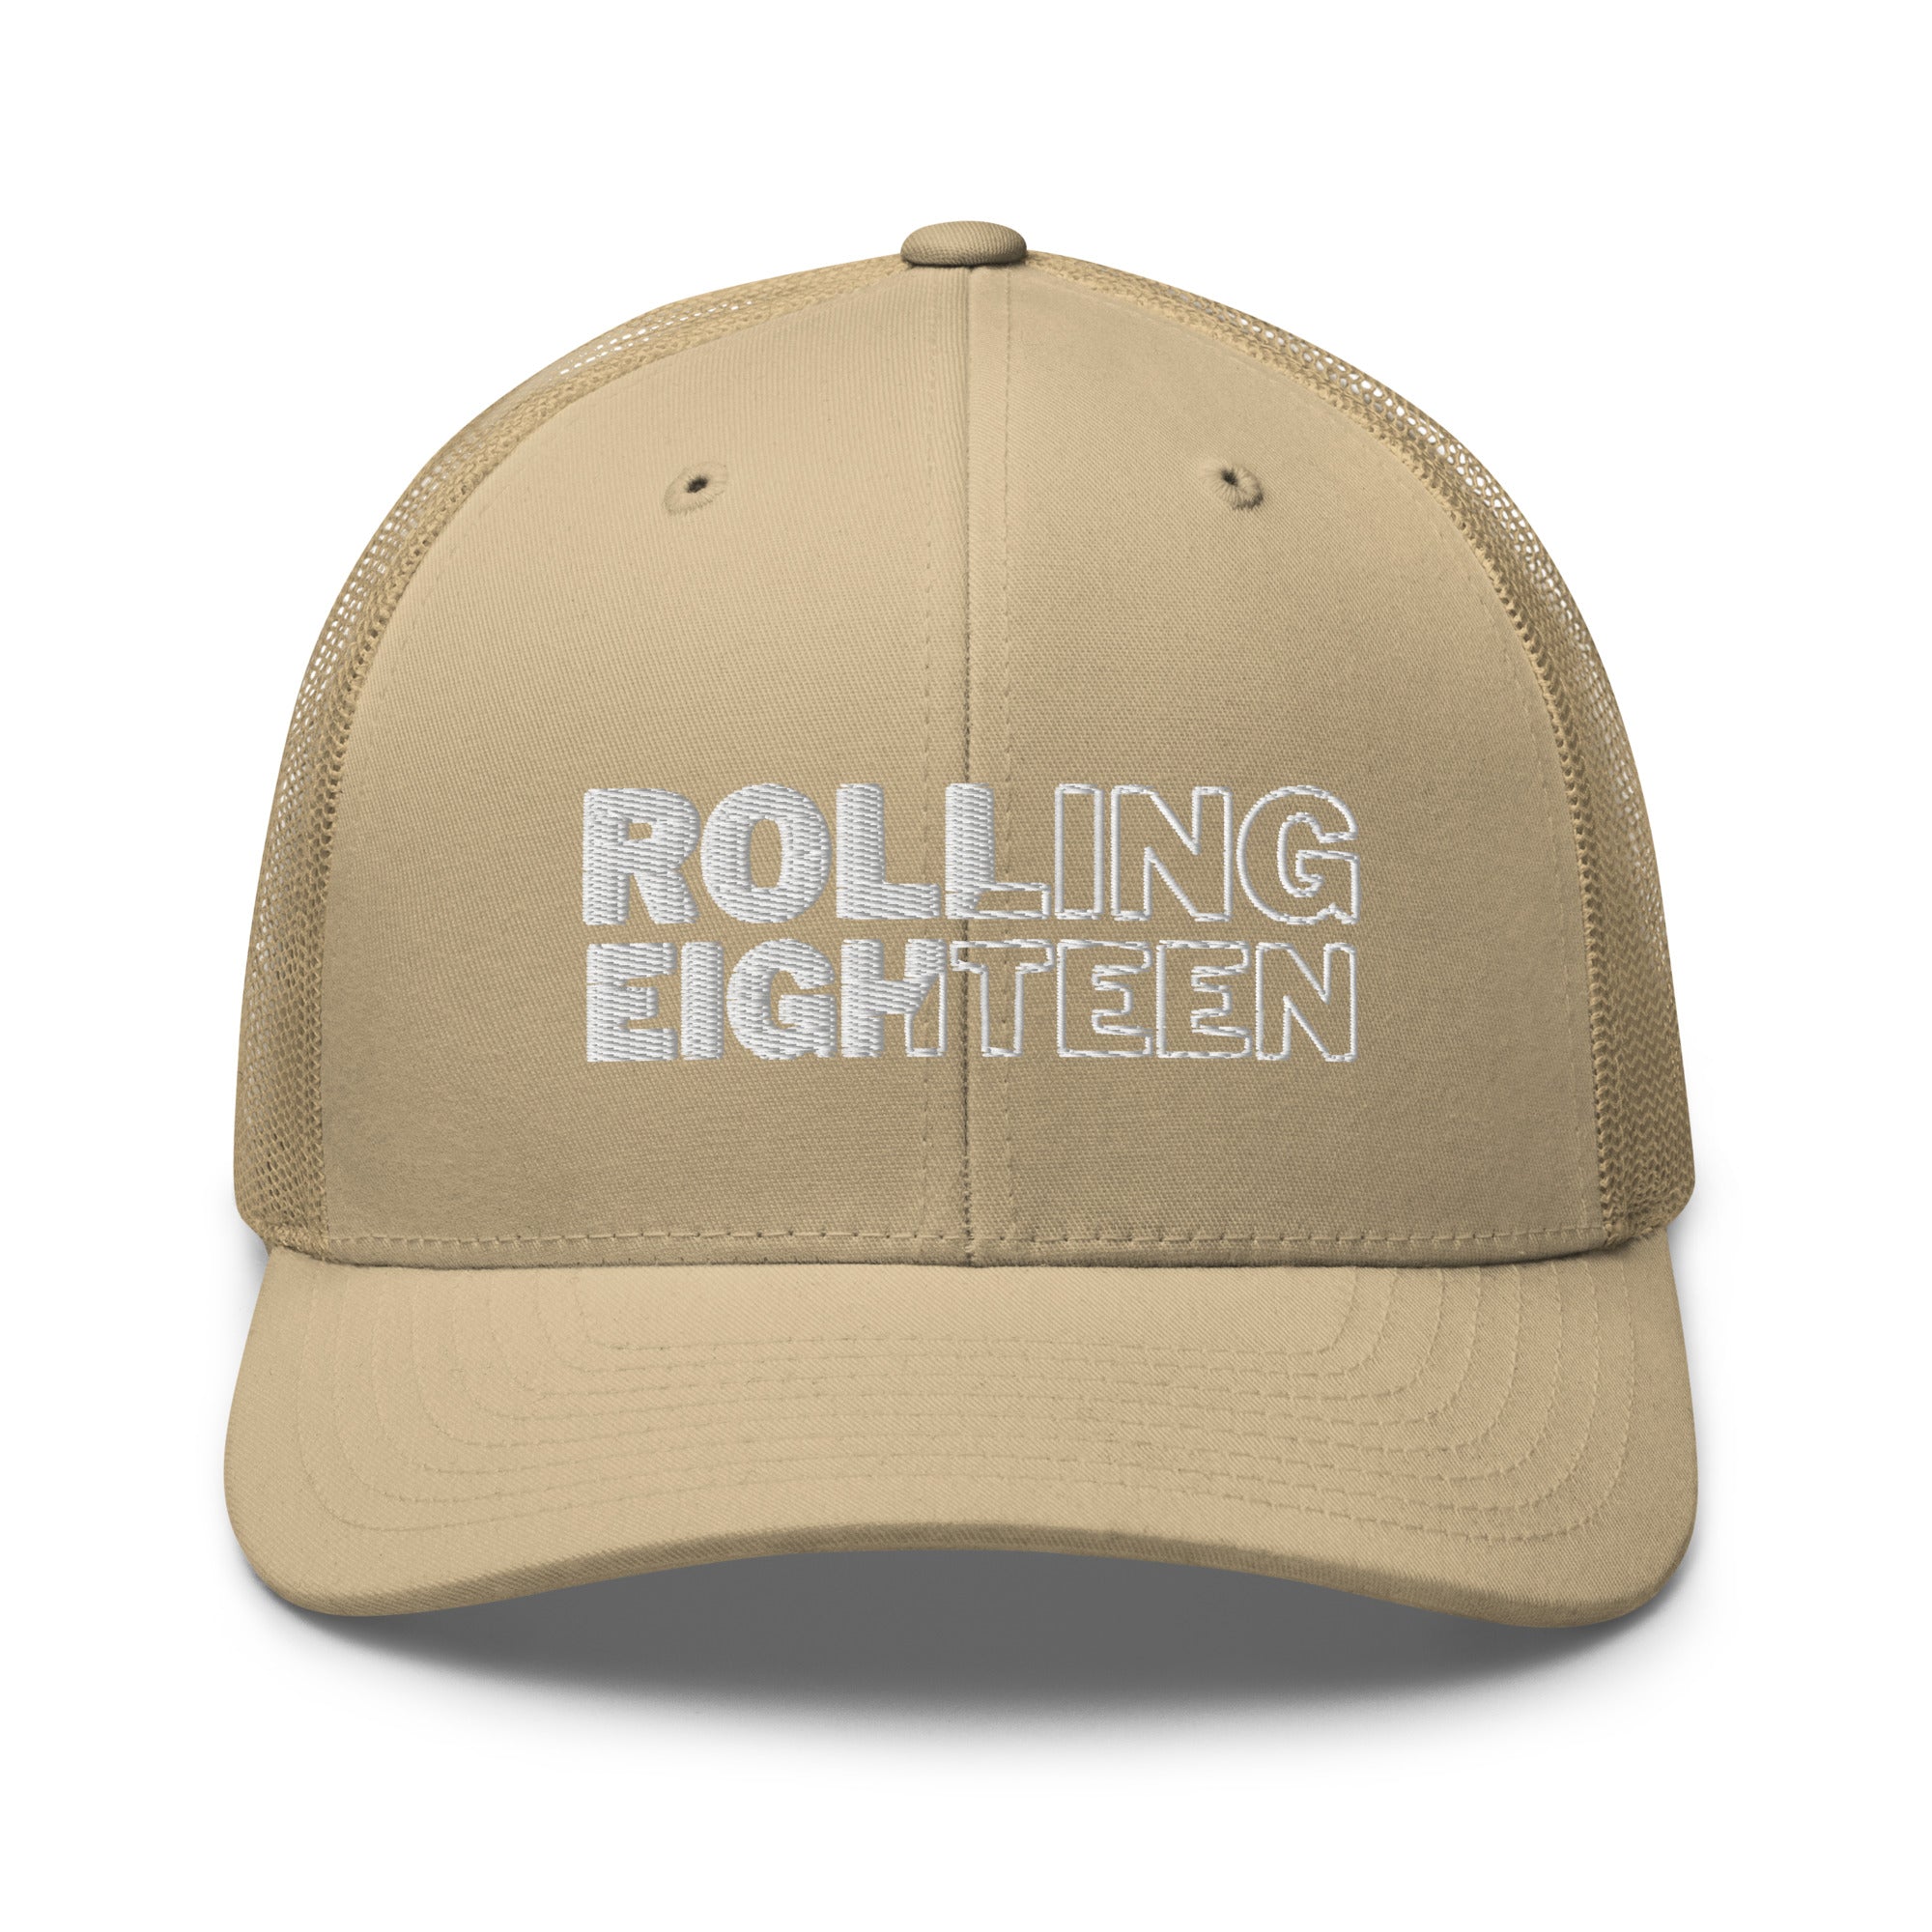 ROLLING18 Embroidered Trucker Hat